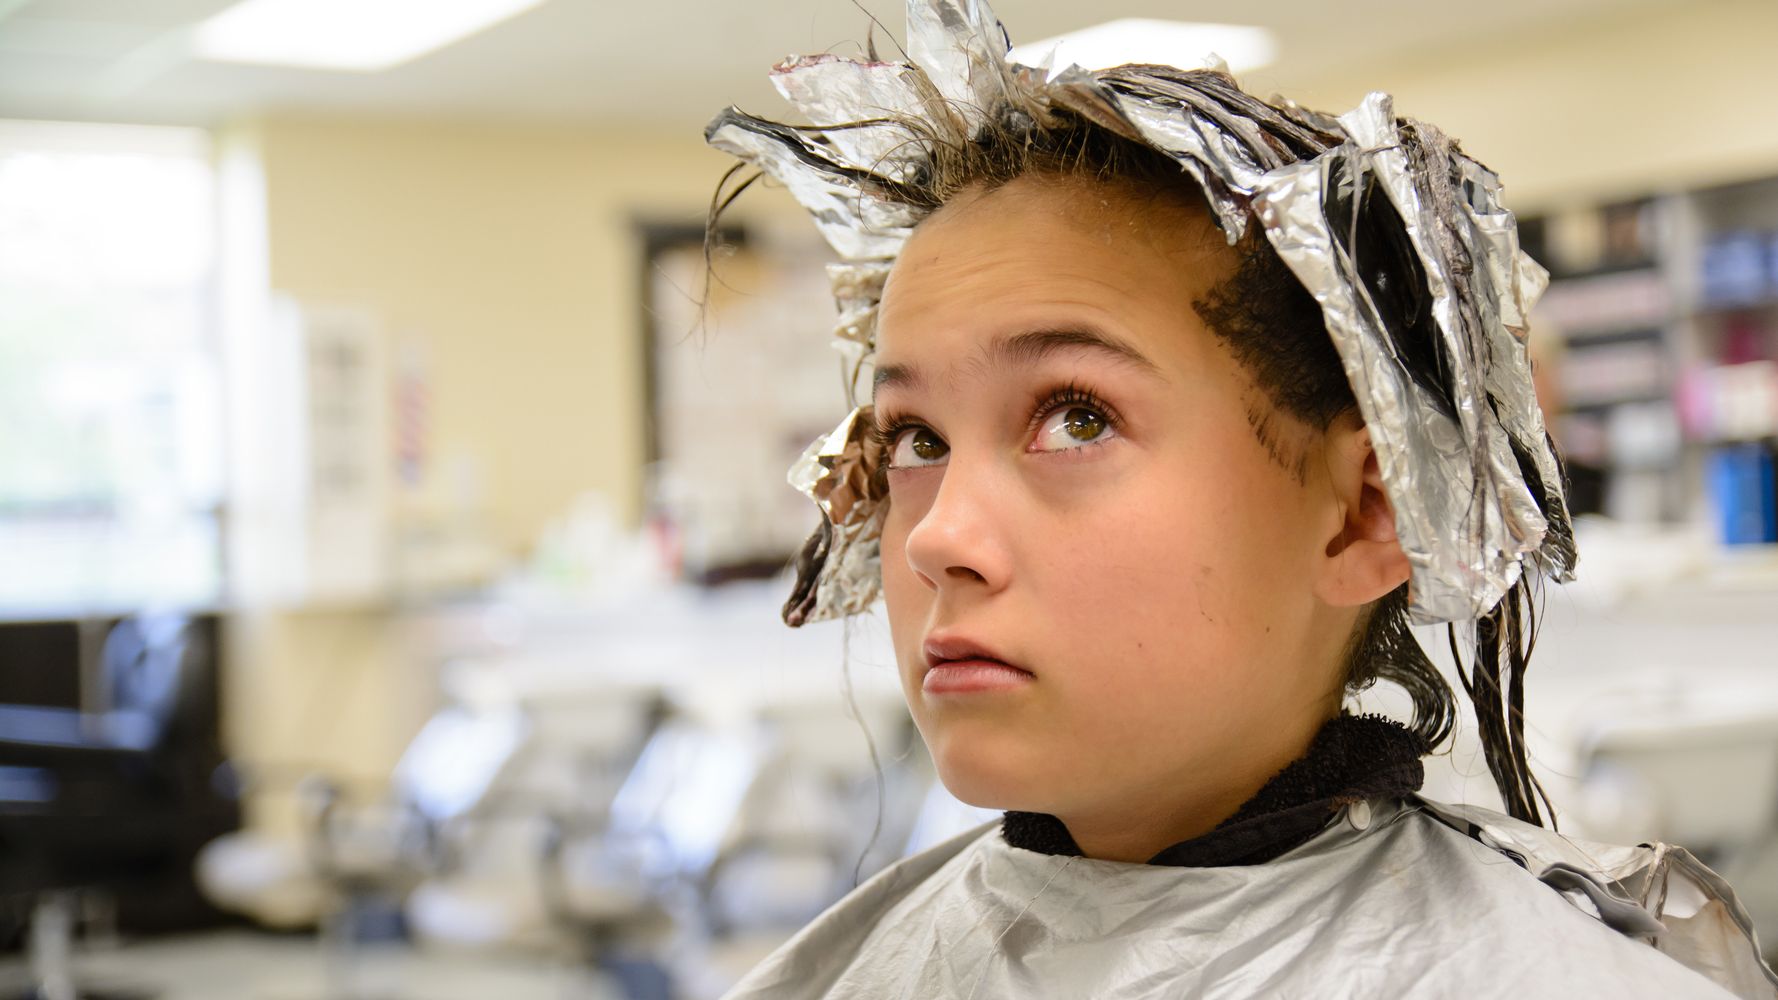 Things Parents Need To Know Before Letting Their Child Dye Their Hair: Risks  And Alternatives | HuffPost UK Parents